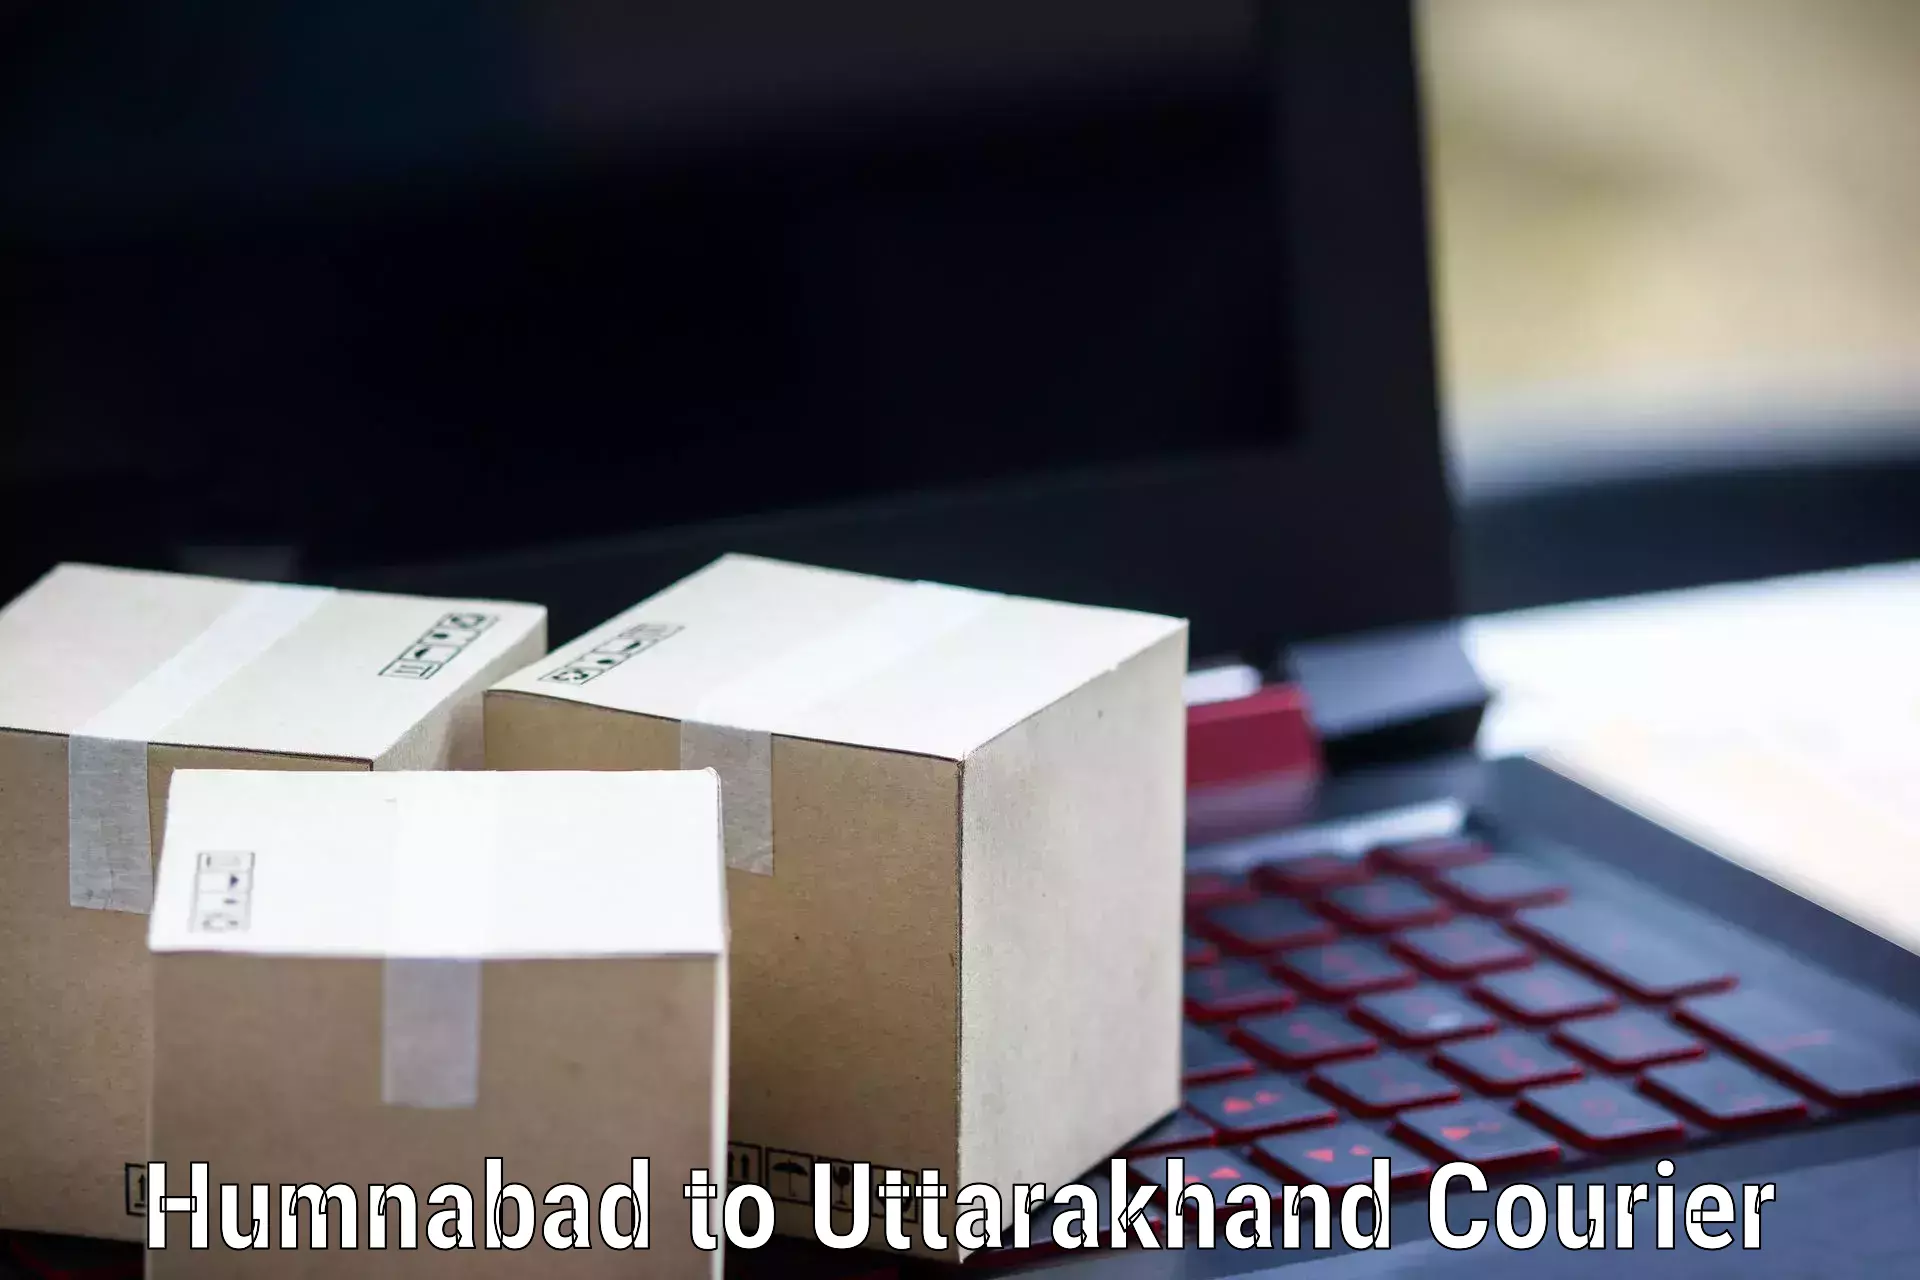 Large package courier in Humnabad to Baijnath Bageshwar